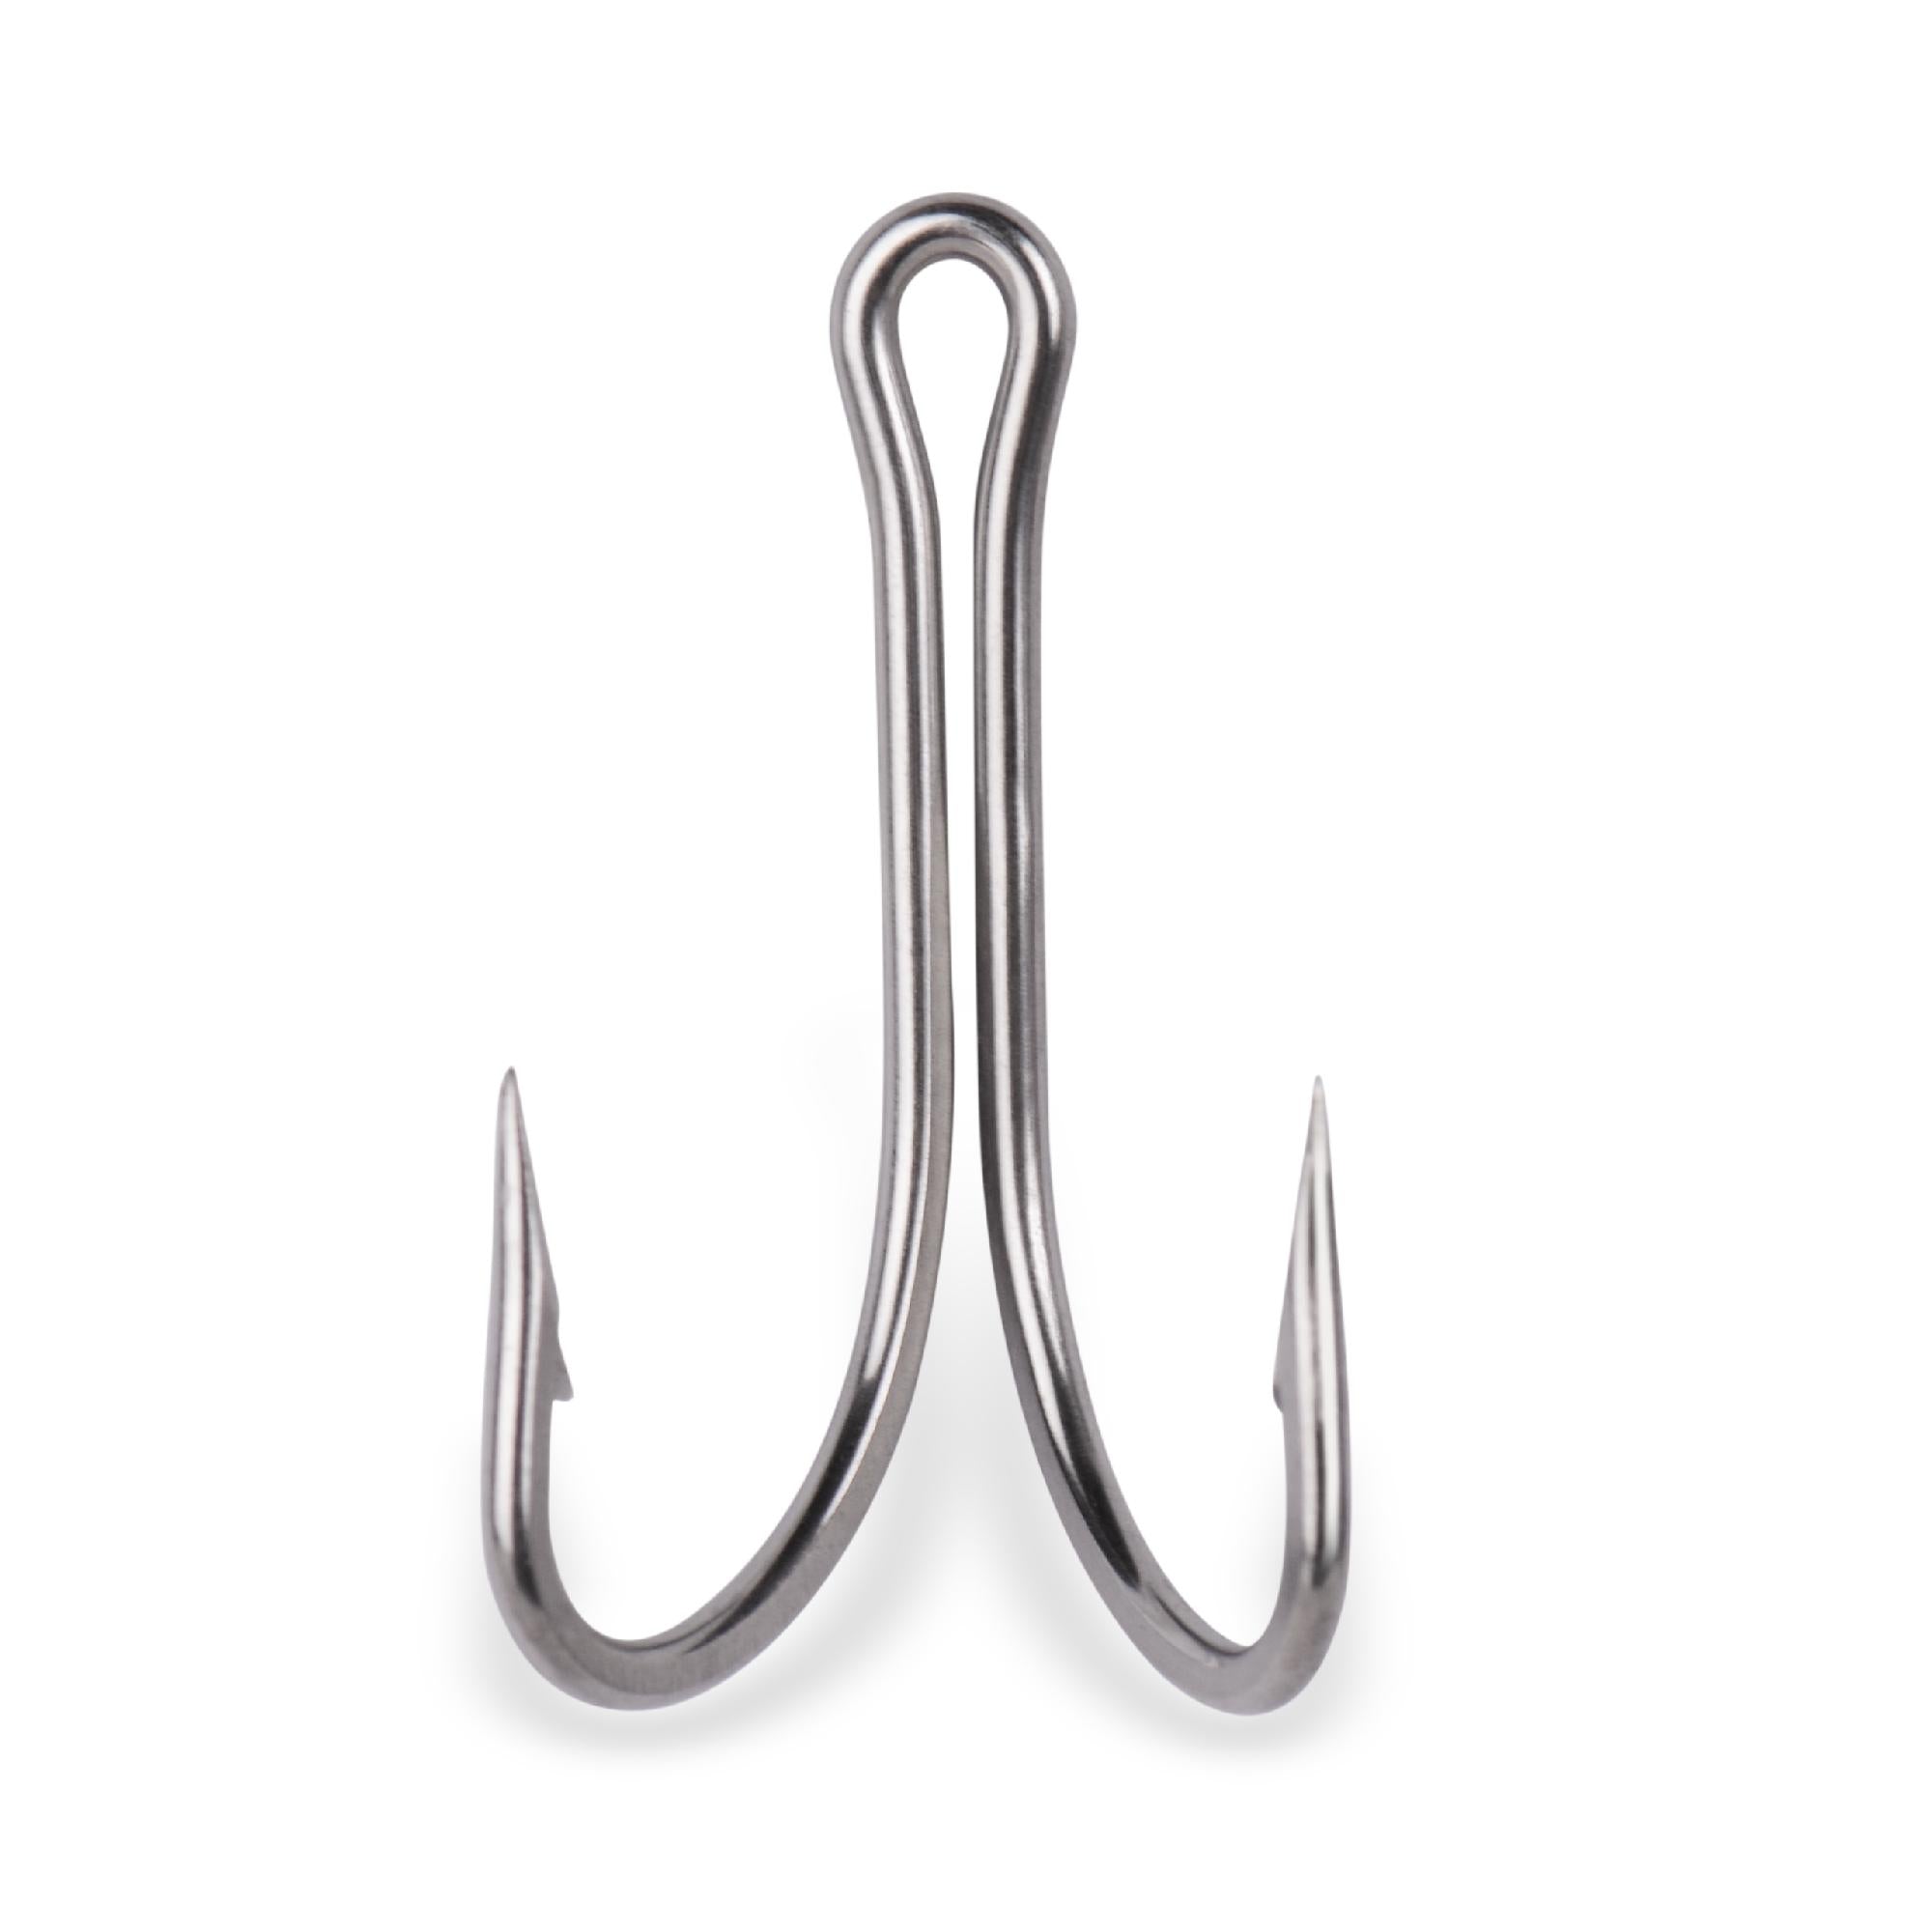 O'Shaughnessy Tuna Double Hook - 2X Strong